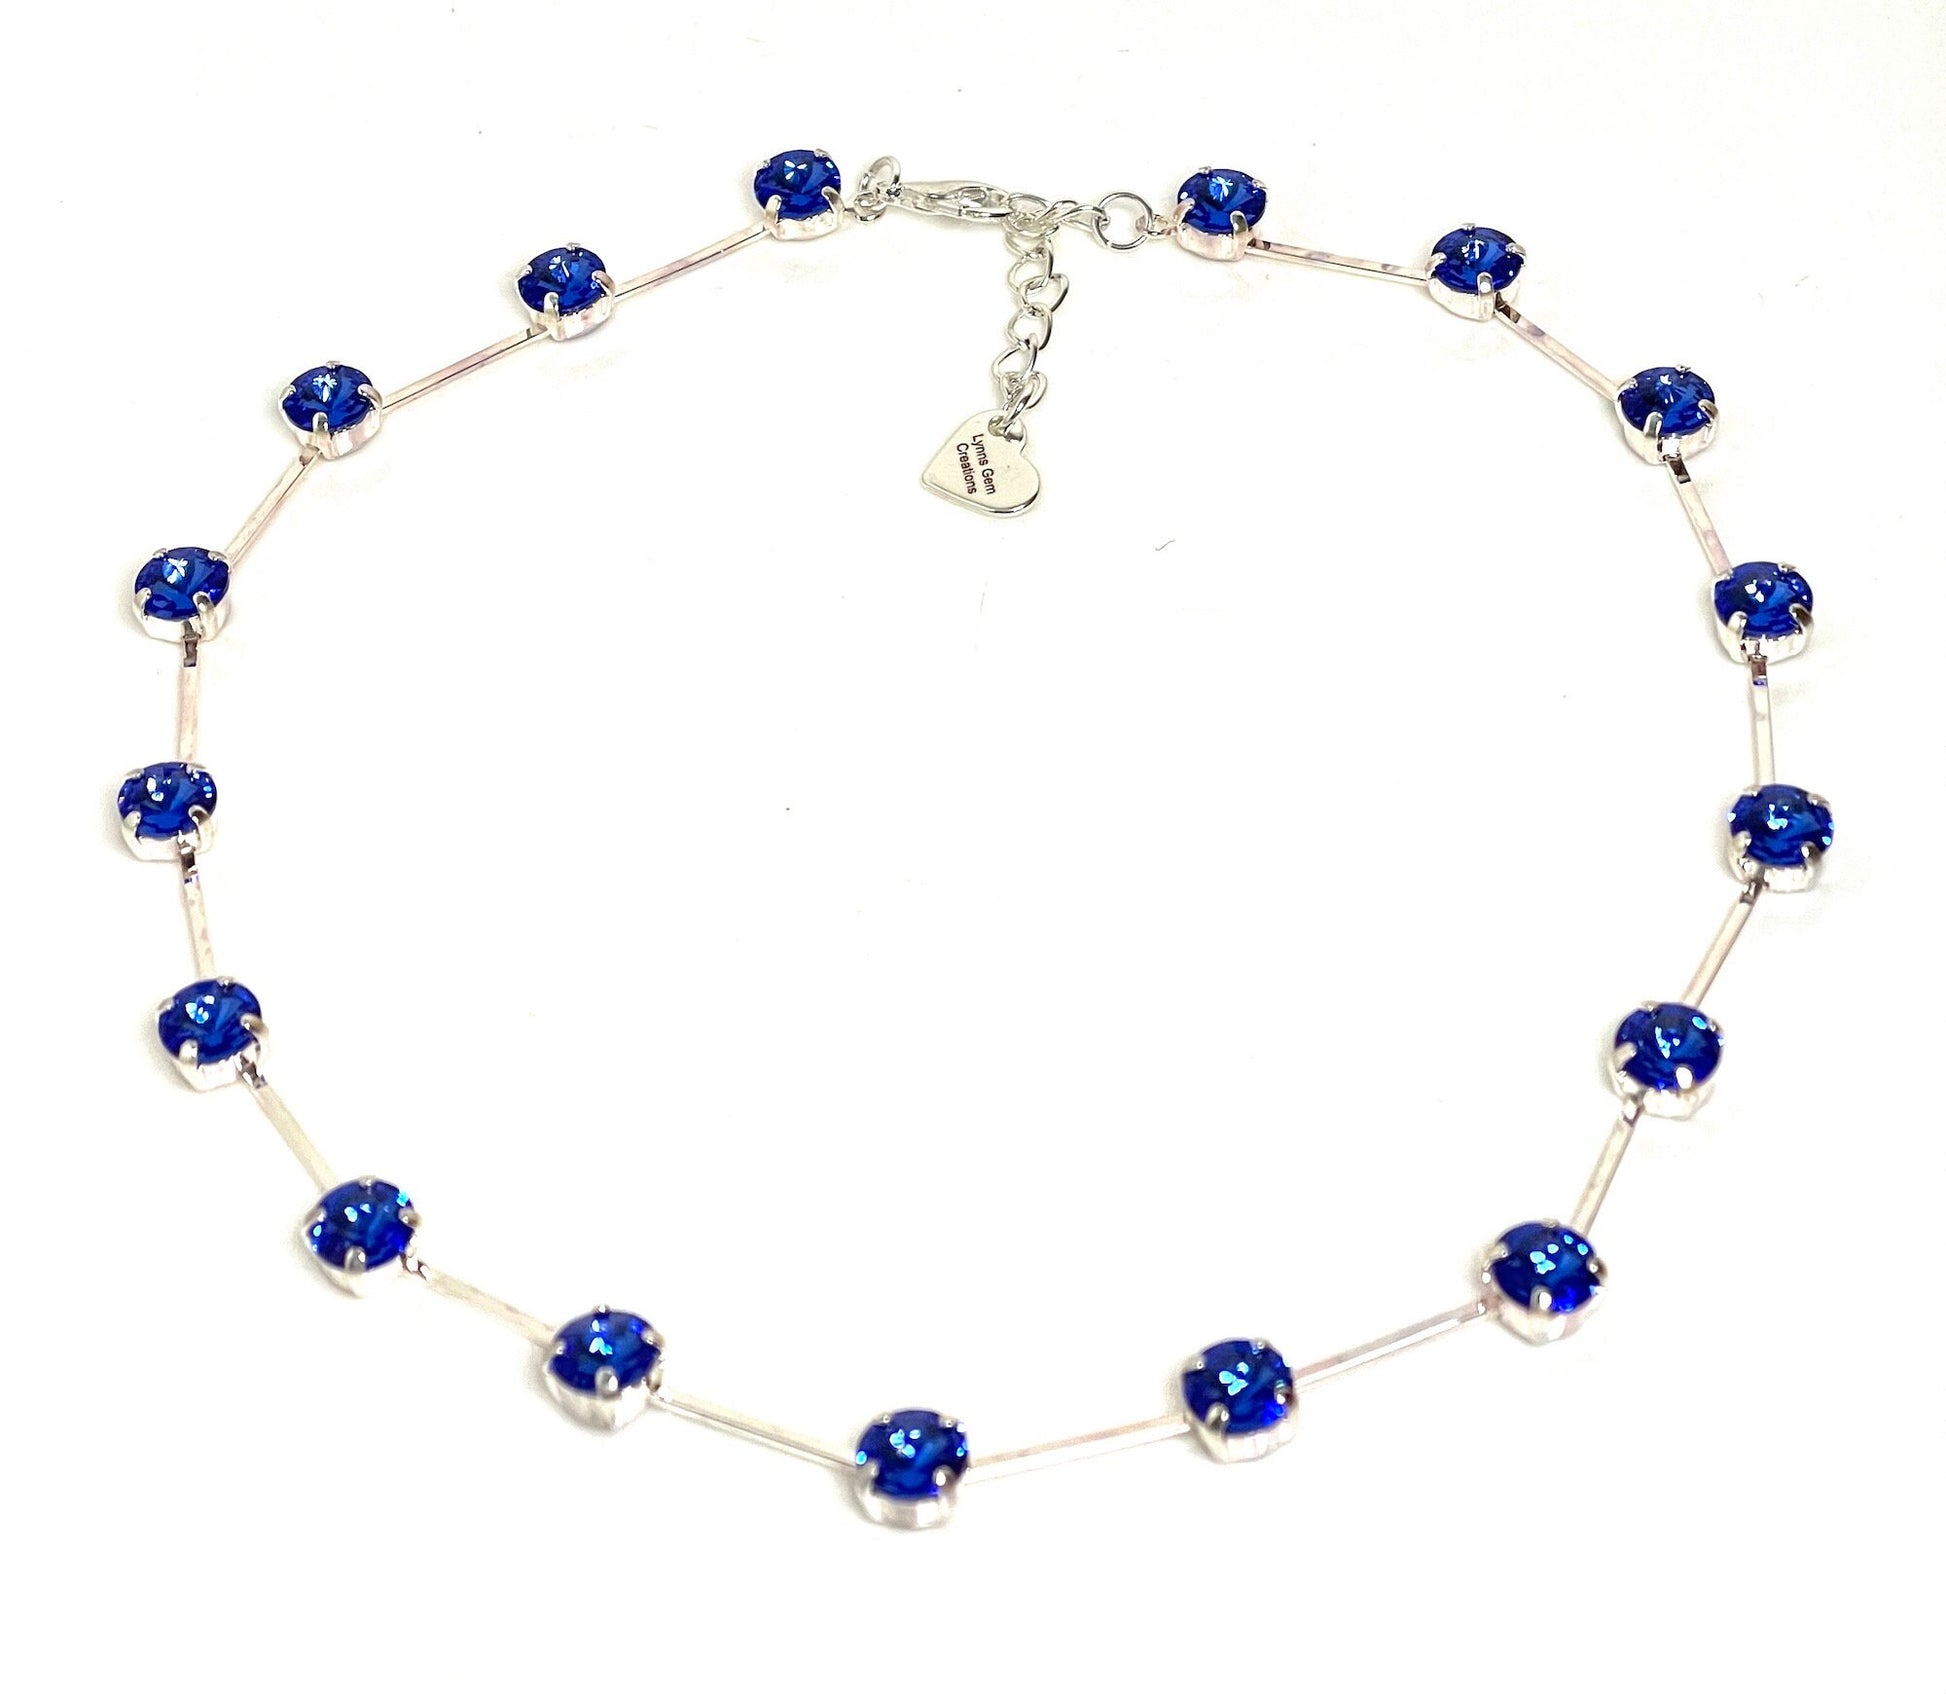 Sapphire Crystal Necklace, Austrian Crystal Choker, Blue Constellation Necklace, Dainty Sapphire Choker, Necklaces for Women